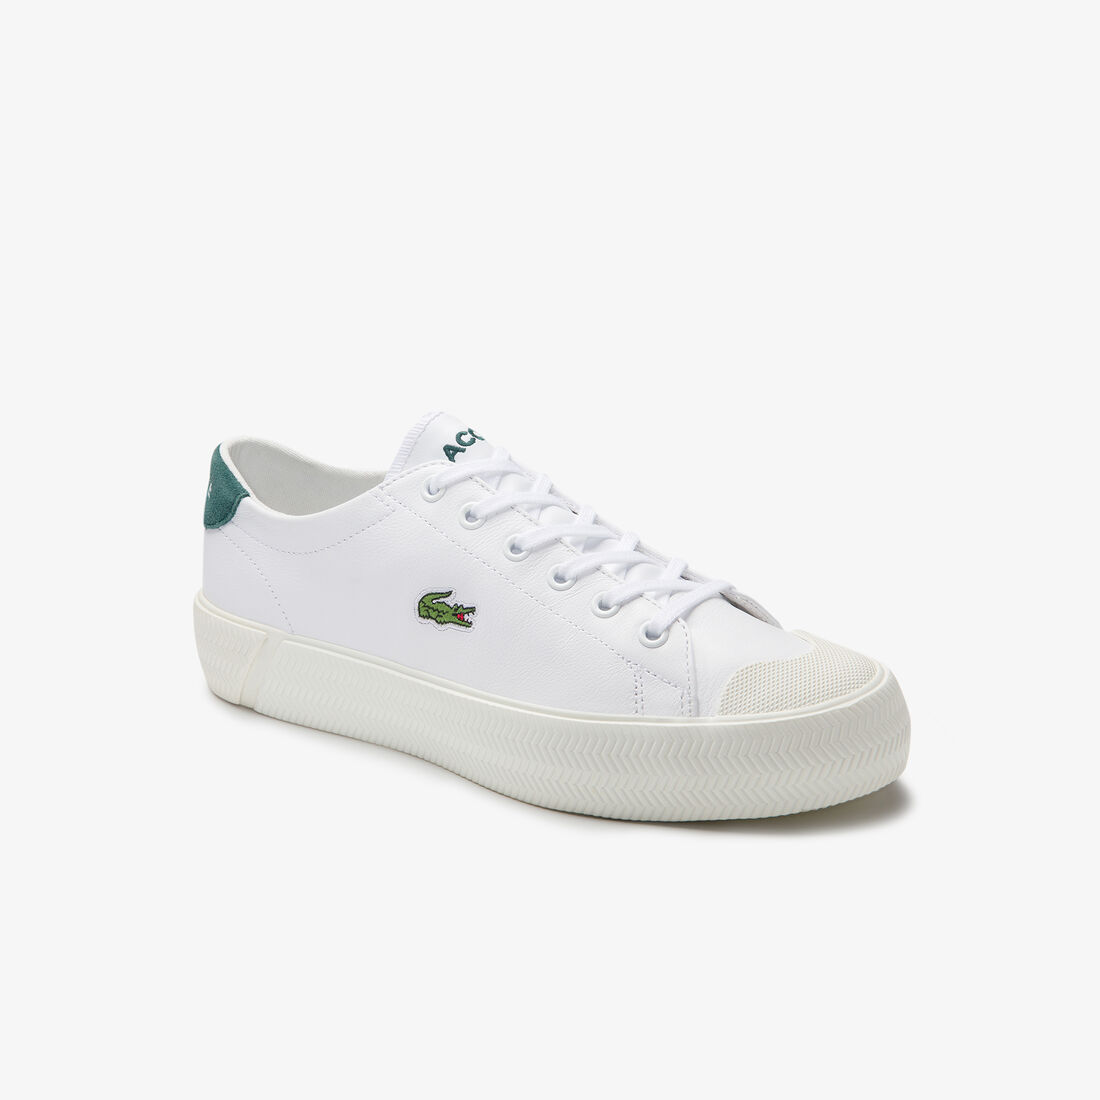 Women's Gripshot Leather and Suede Sneakers